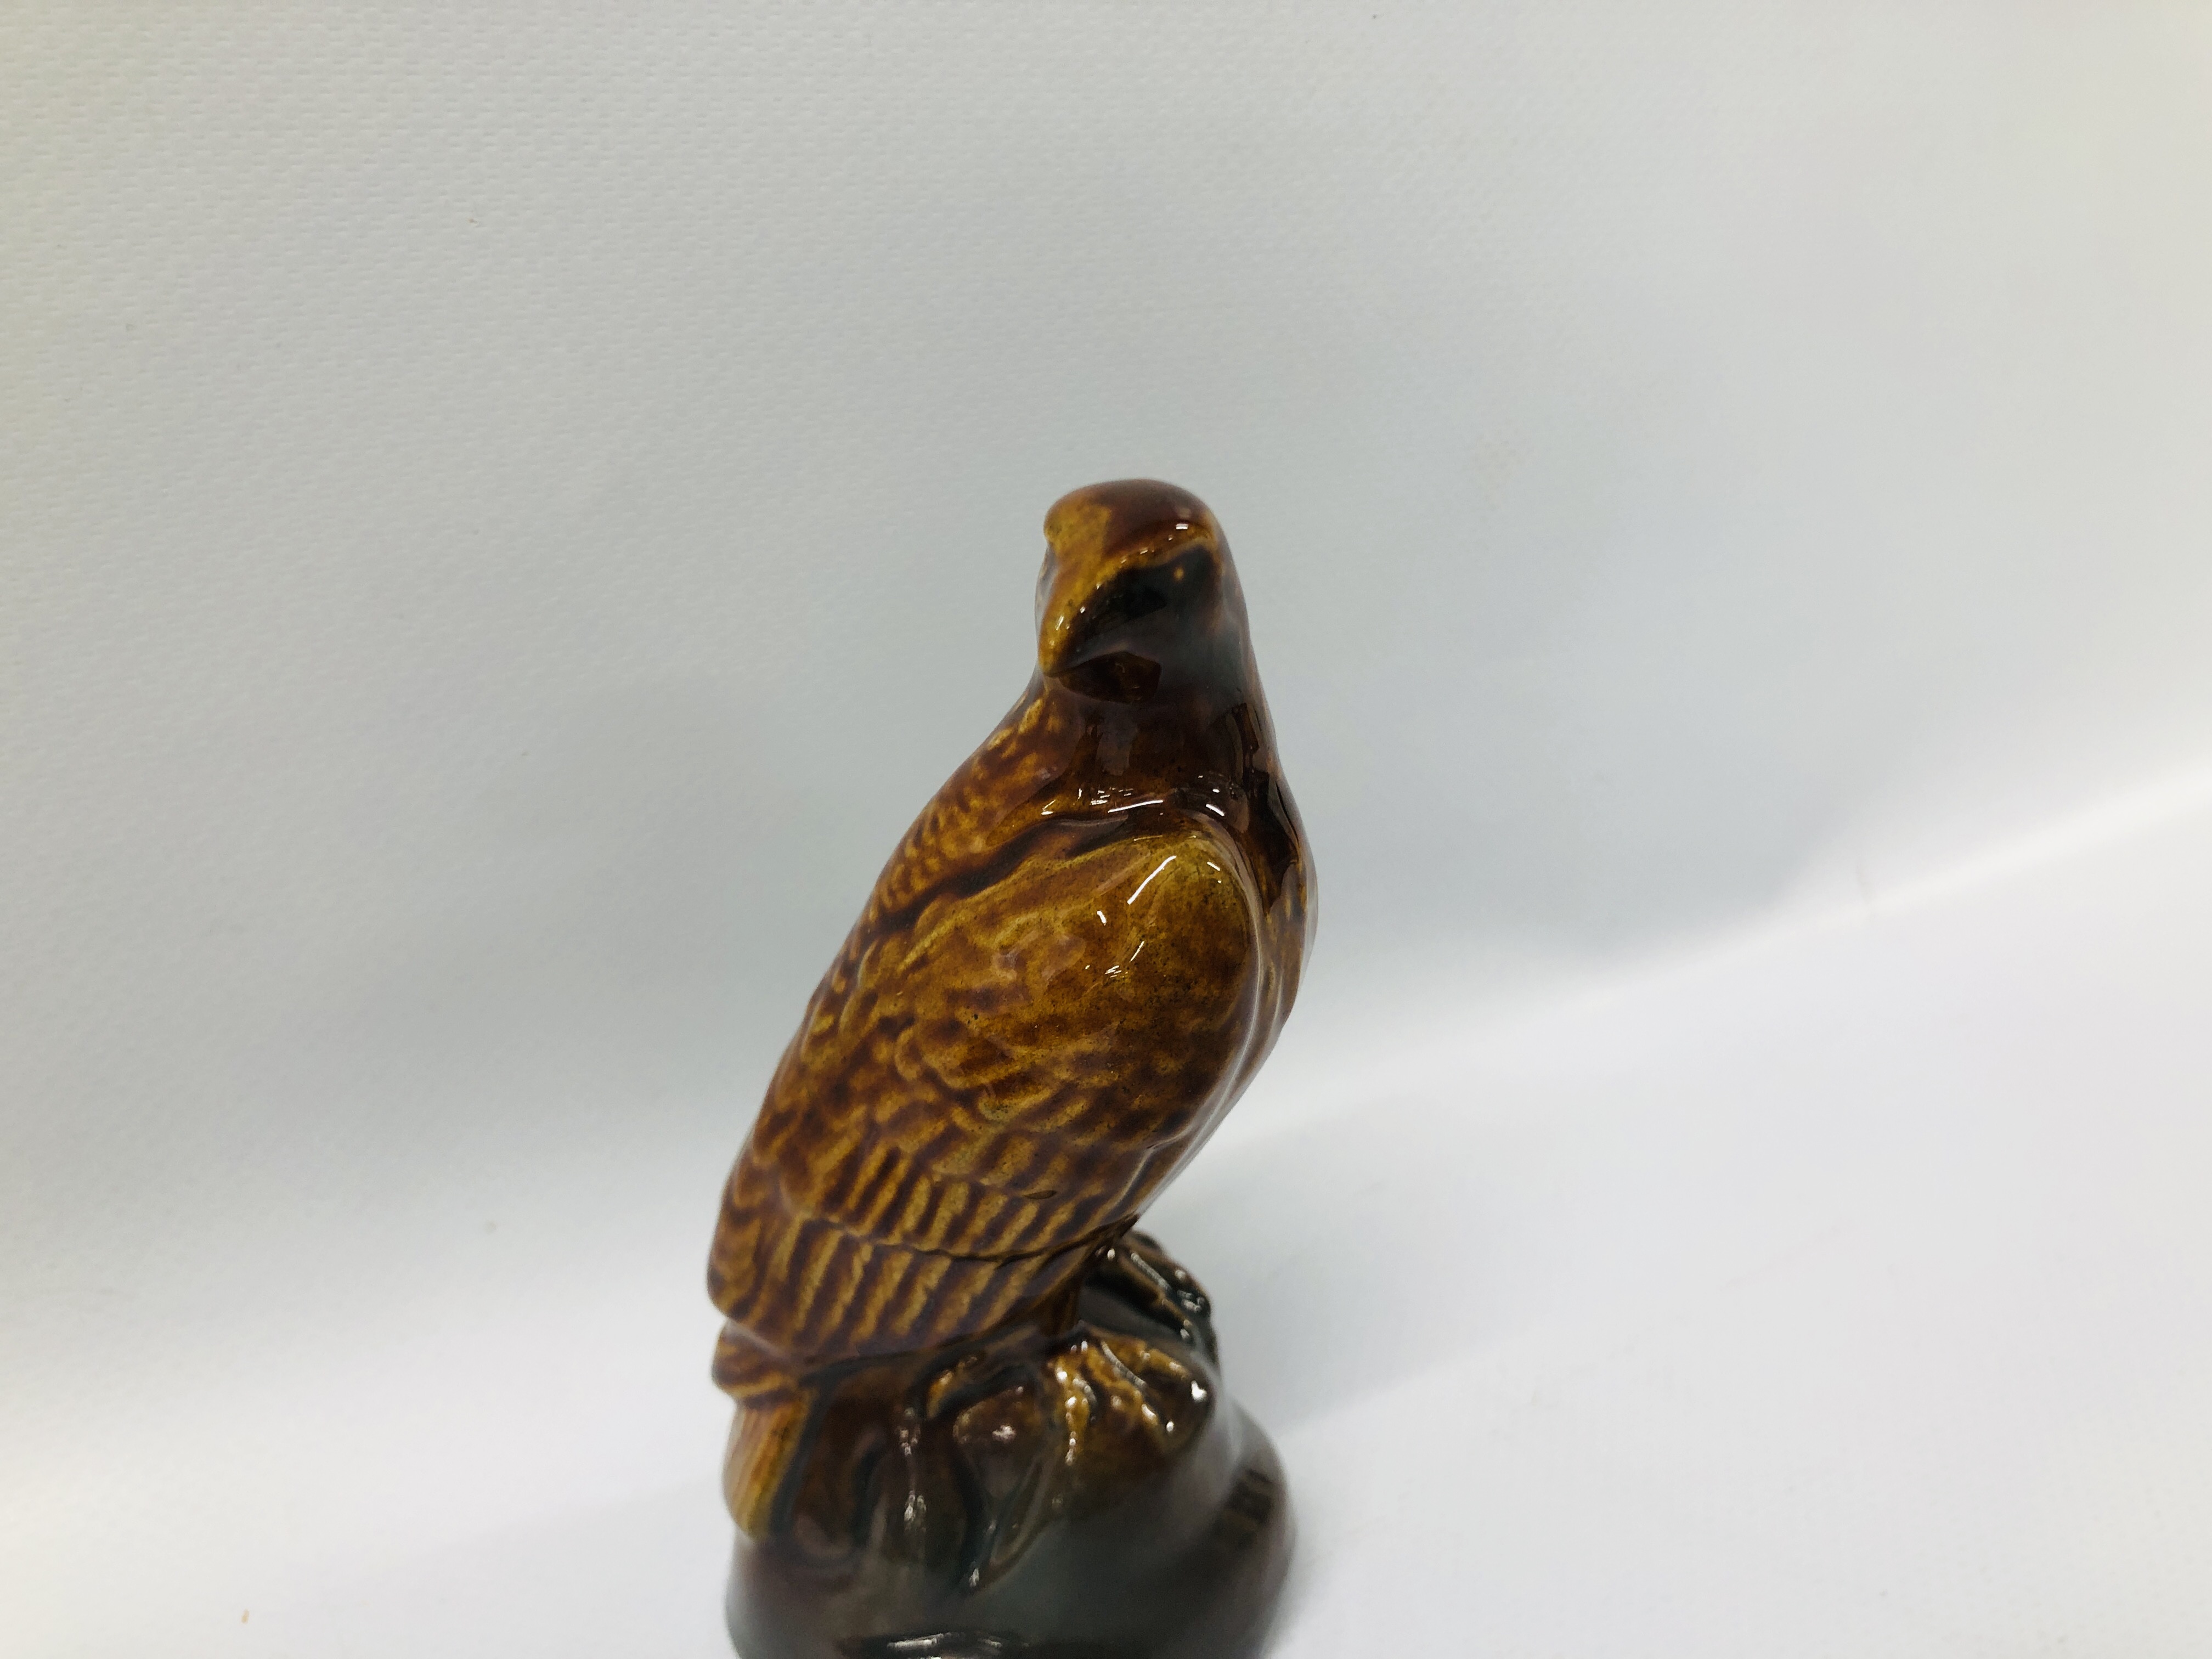 BESWICK "SUSIE JAMAICA" FIGURE ALONG WITH A MINIATURE BESWICK BENEAGLES WHISKY DECANTER (EMPTY) - Image 3 of 13